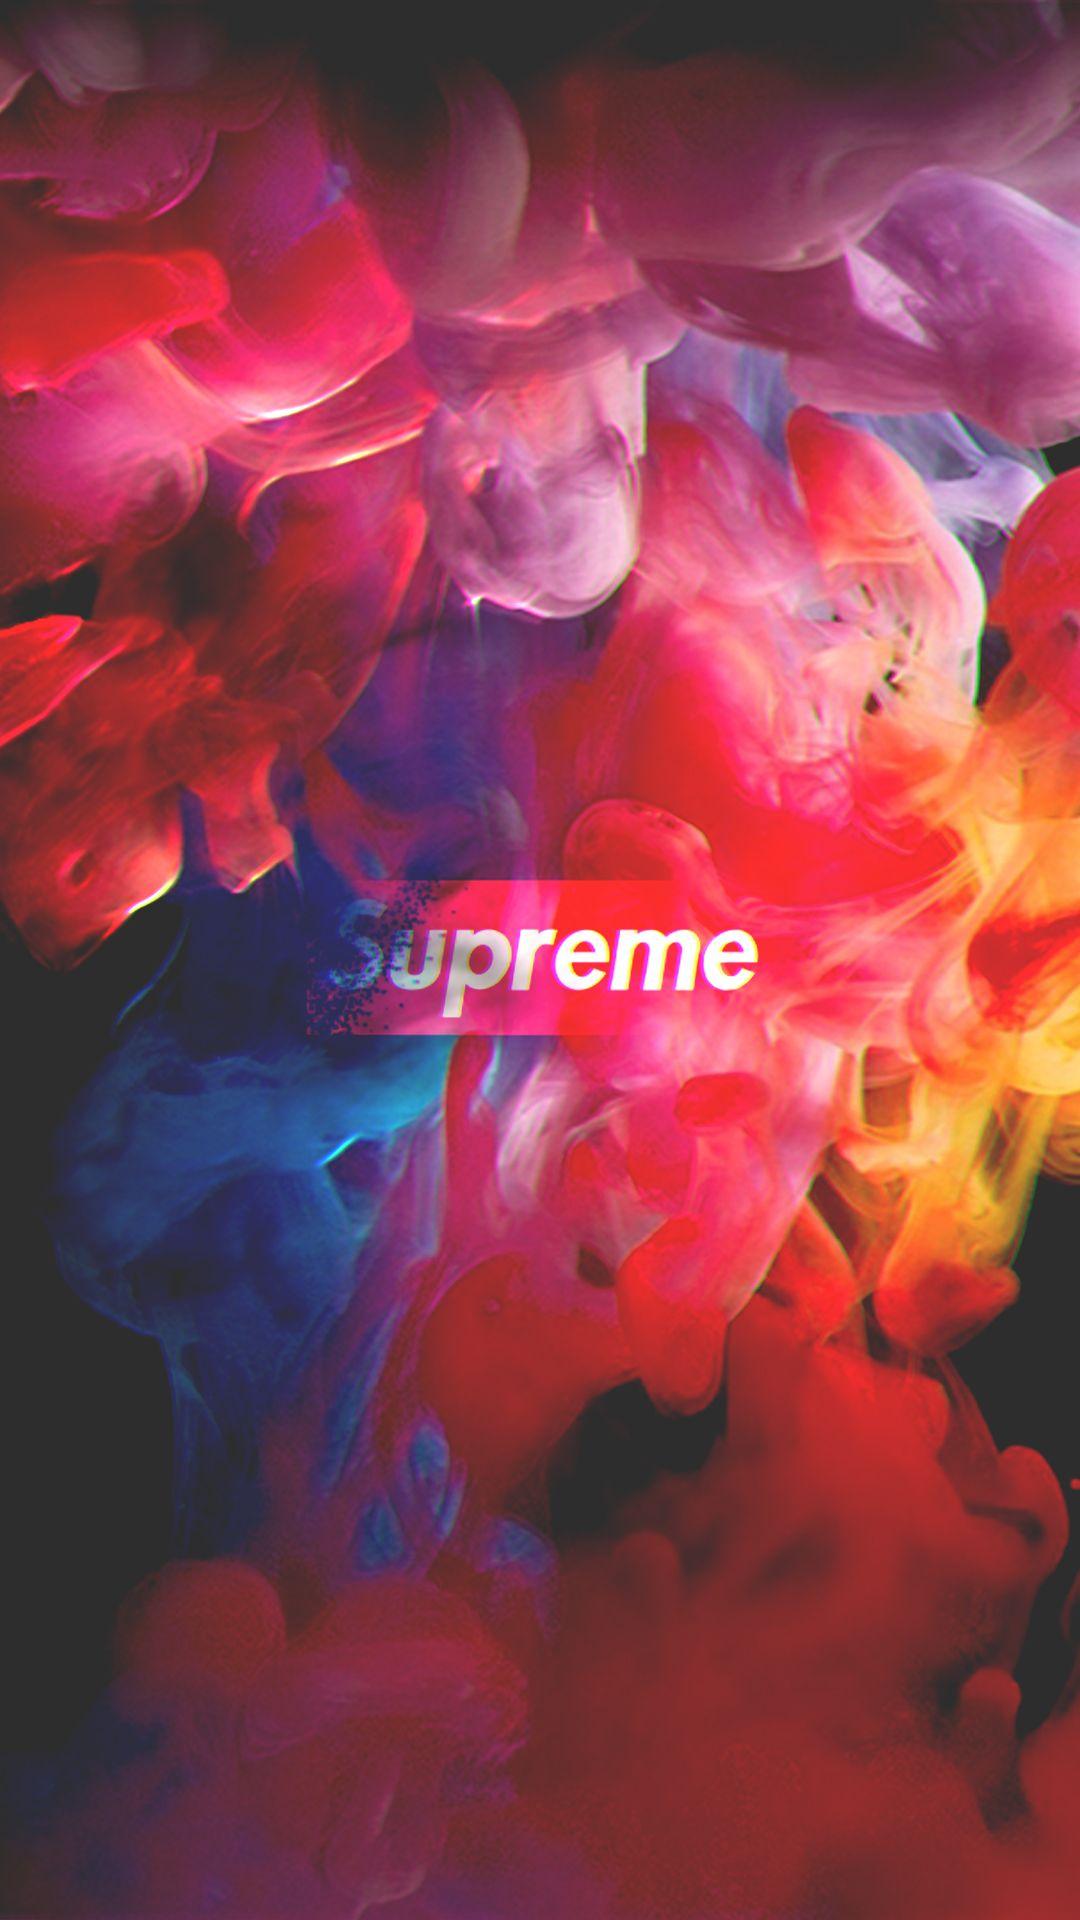 Supreme Phone Wallpapers Top Free Supreme Phone Backgrounds